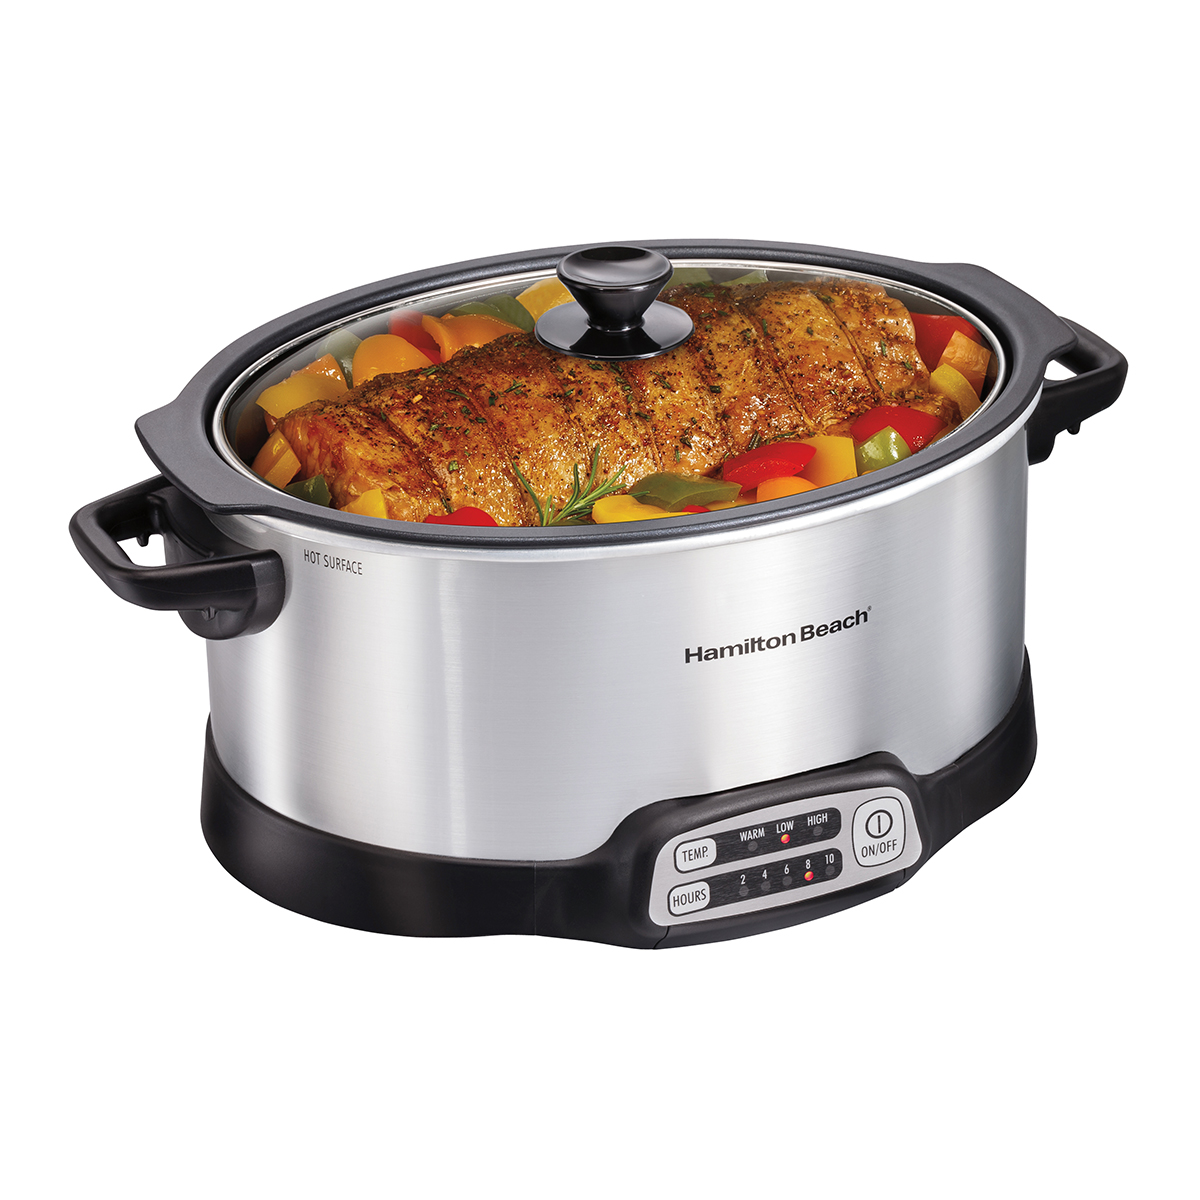 Stovetop Sear & Cook Slow Cooker (33662)